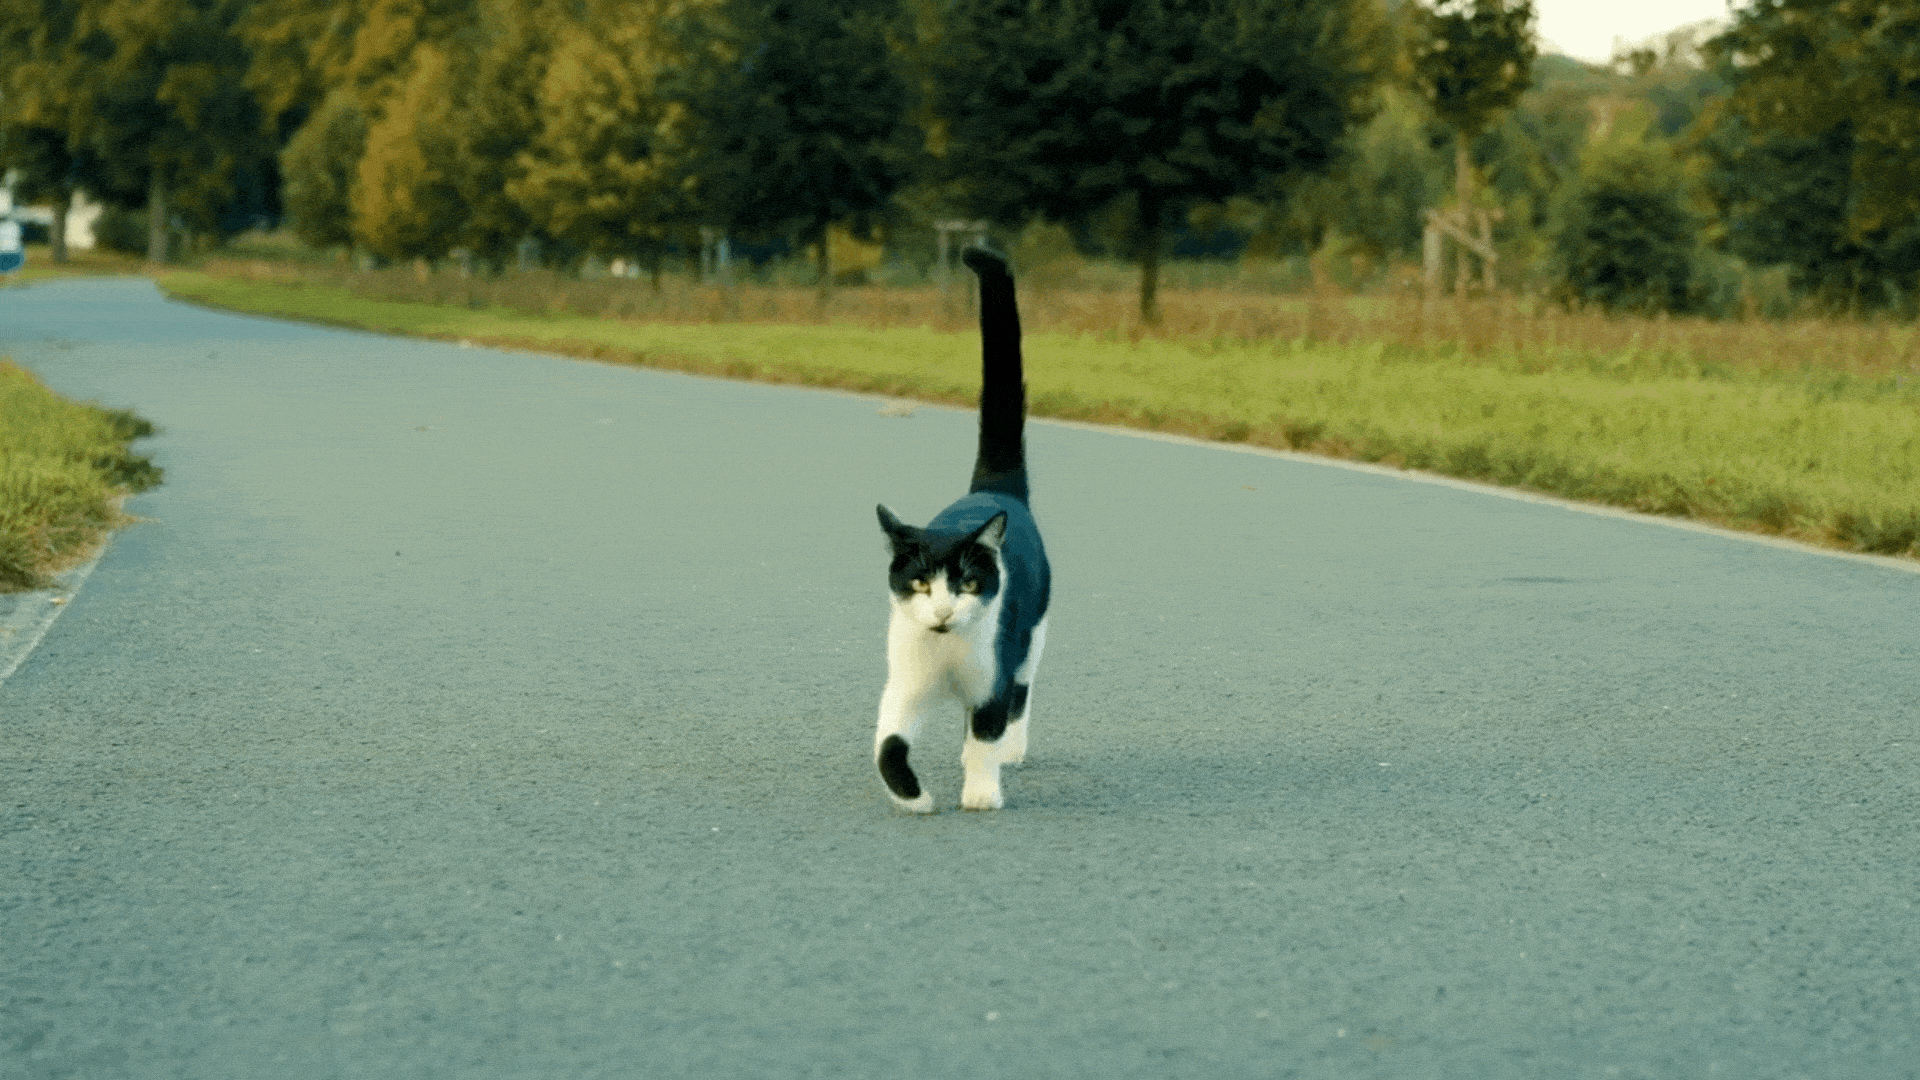 GIF of a cat walking with a unique gait similar to camels and giraffes”